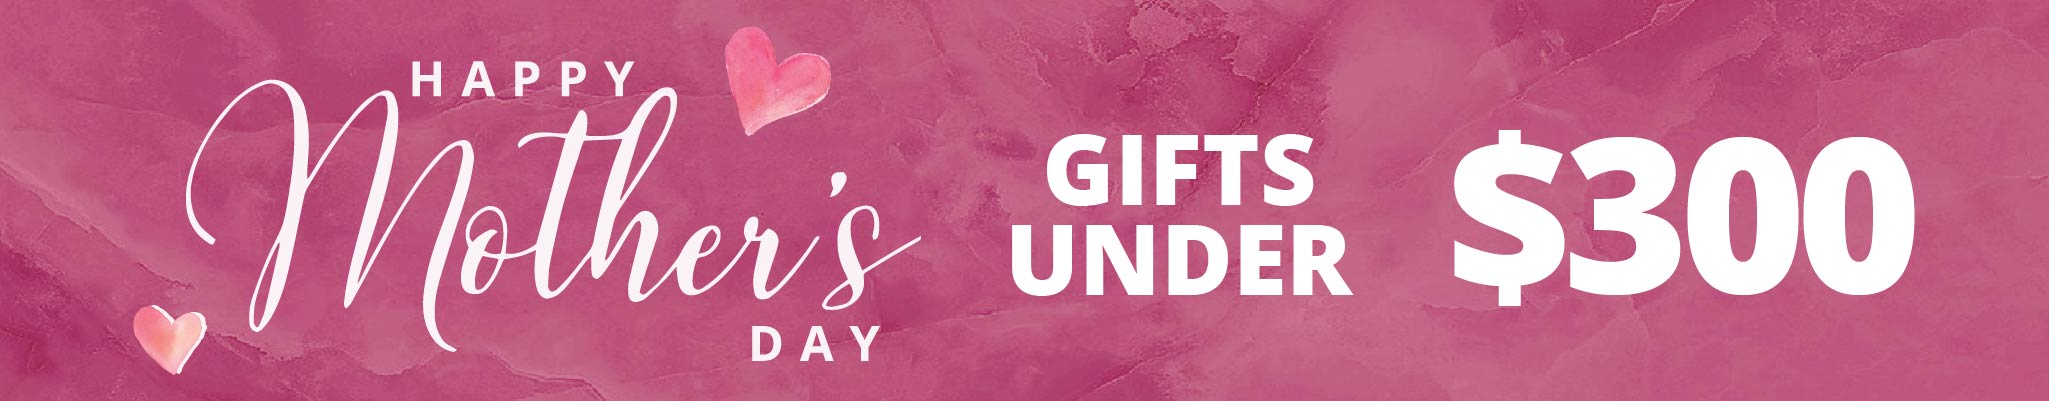 Mother's Day Gifts under $300